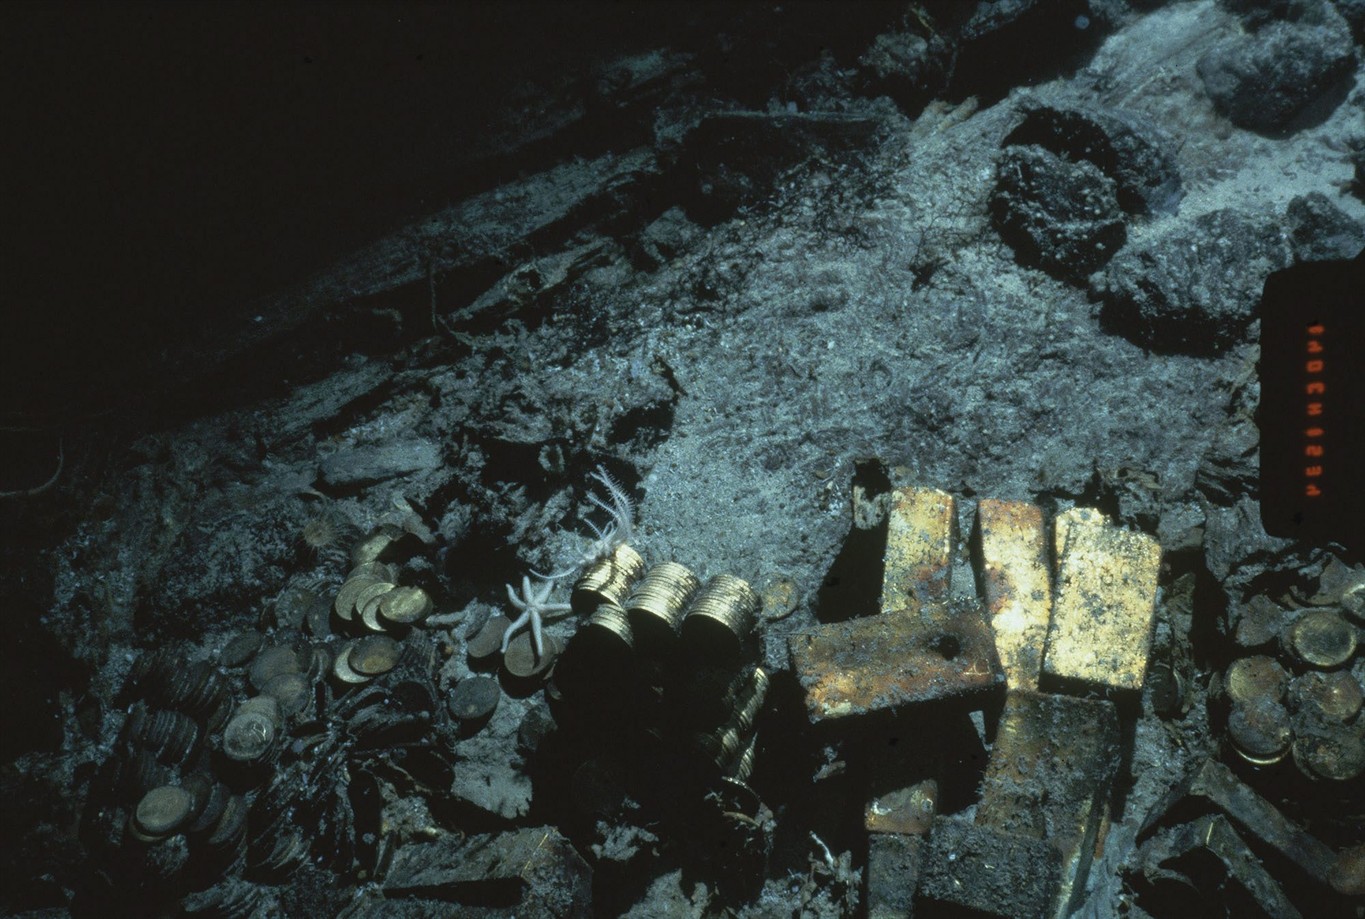 Gold! Treasure lost at sea in 1857 shipwreck goes on display